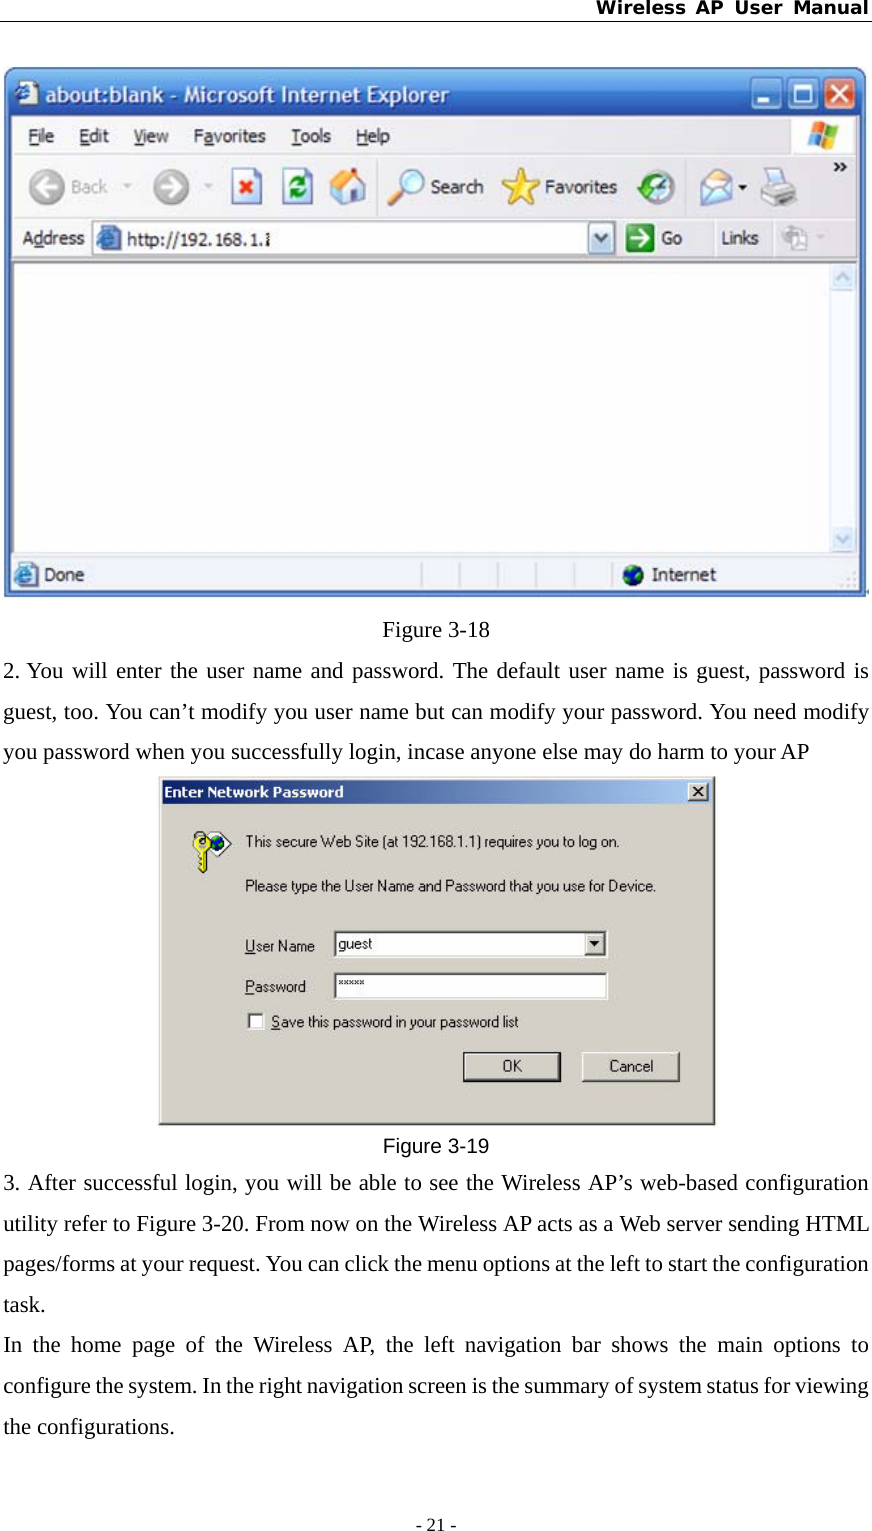 Wireless AP User Manual - 21 -   Figure 3-18 2. You will enter the user name and password. The default user name is guest, password is guest, too. You can’t modify you user name but can modify your password. You need modify you password when you successfully login, incase anyone else may do harm to your AP  Figure 3-19 3. After successful login, you will be able to see the Wireless AP’s web-based configuration utility refer to Figure 3-20. From now on the Wireless AP acts as a Web server sending HTML pages/forms at your request. You can click the menu options at the left to start the configuration task. In the home page of the Wireless AP, the left navigation bar shows the main options to configure the system. In the right navigation screen is the summary of system status for viewing the configurations. 